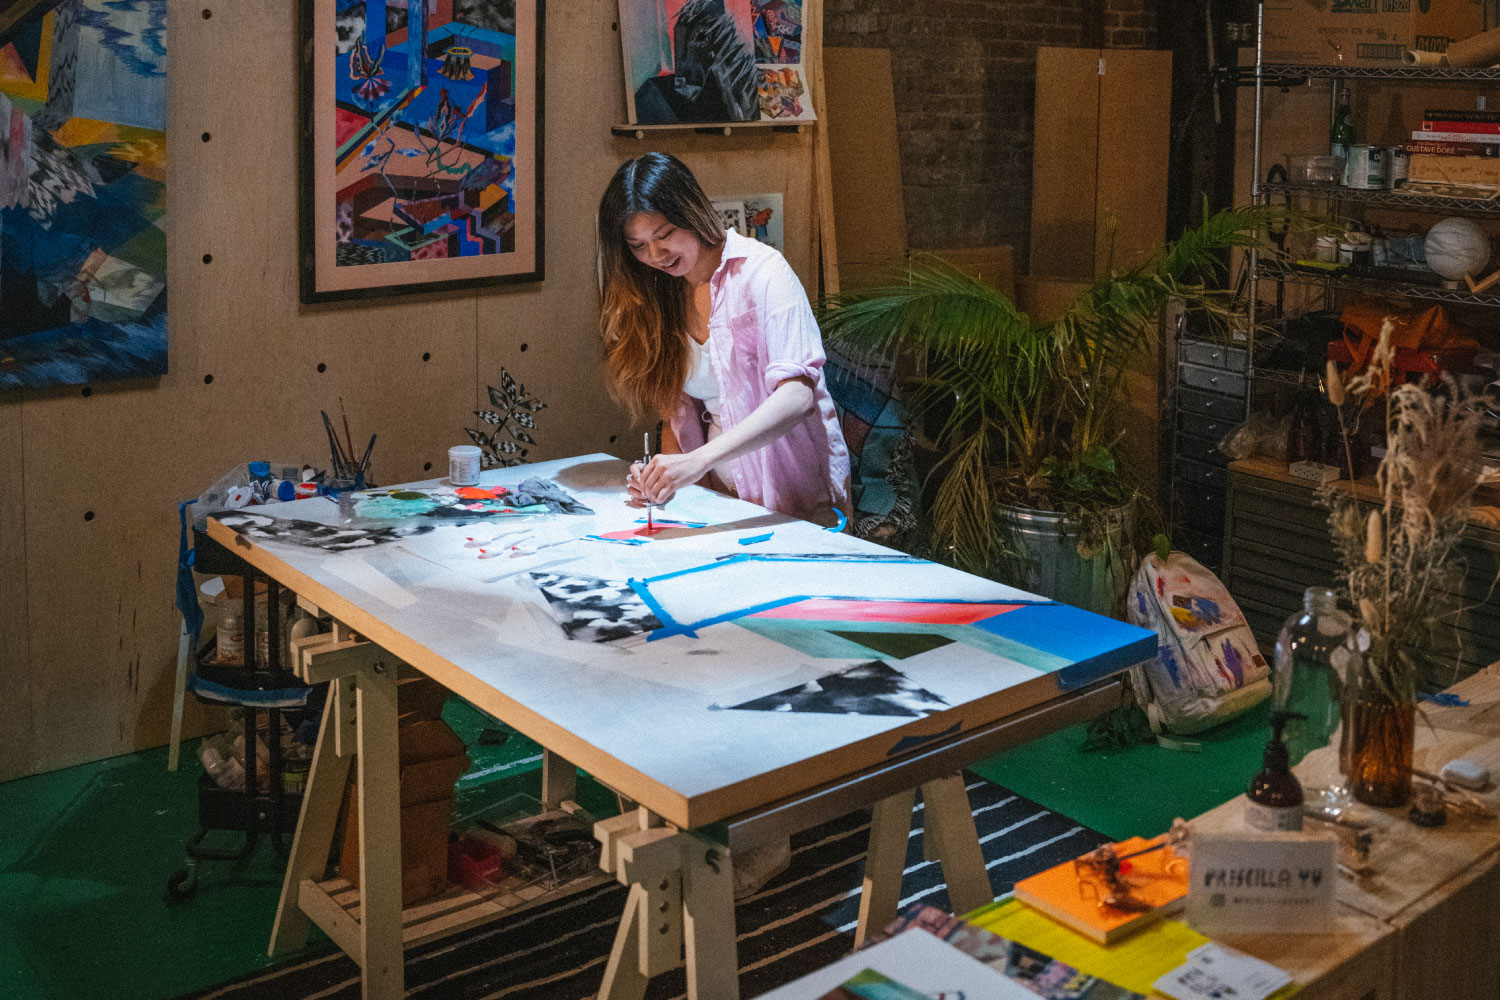 A person in their art studio painting a large canvas on the table with their artwork hanging behind them and their Heavyweight Canvas Herschel Heritage Backpack on the ground behind them with paint all over it.